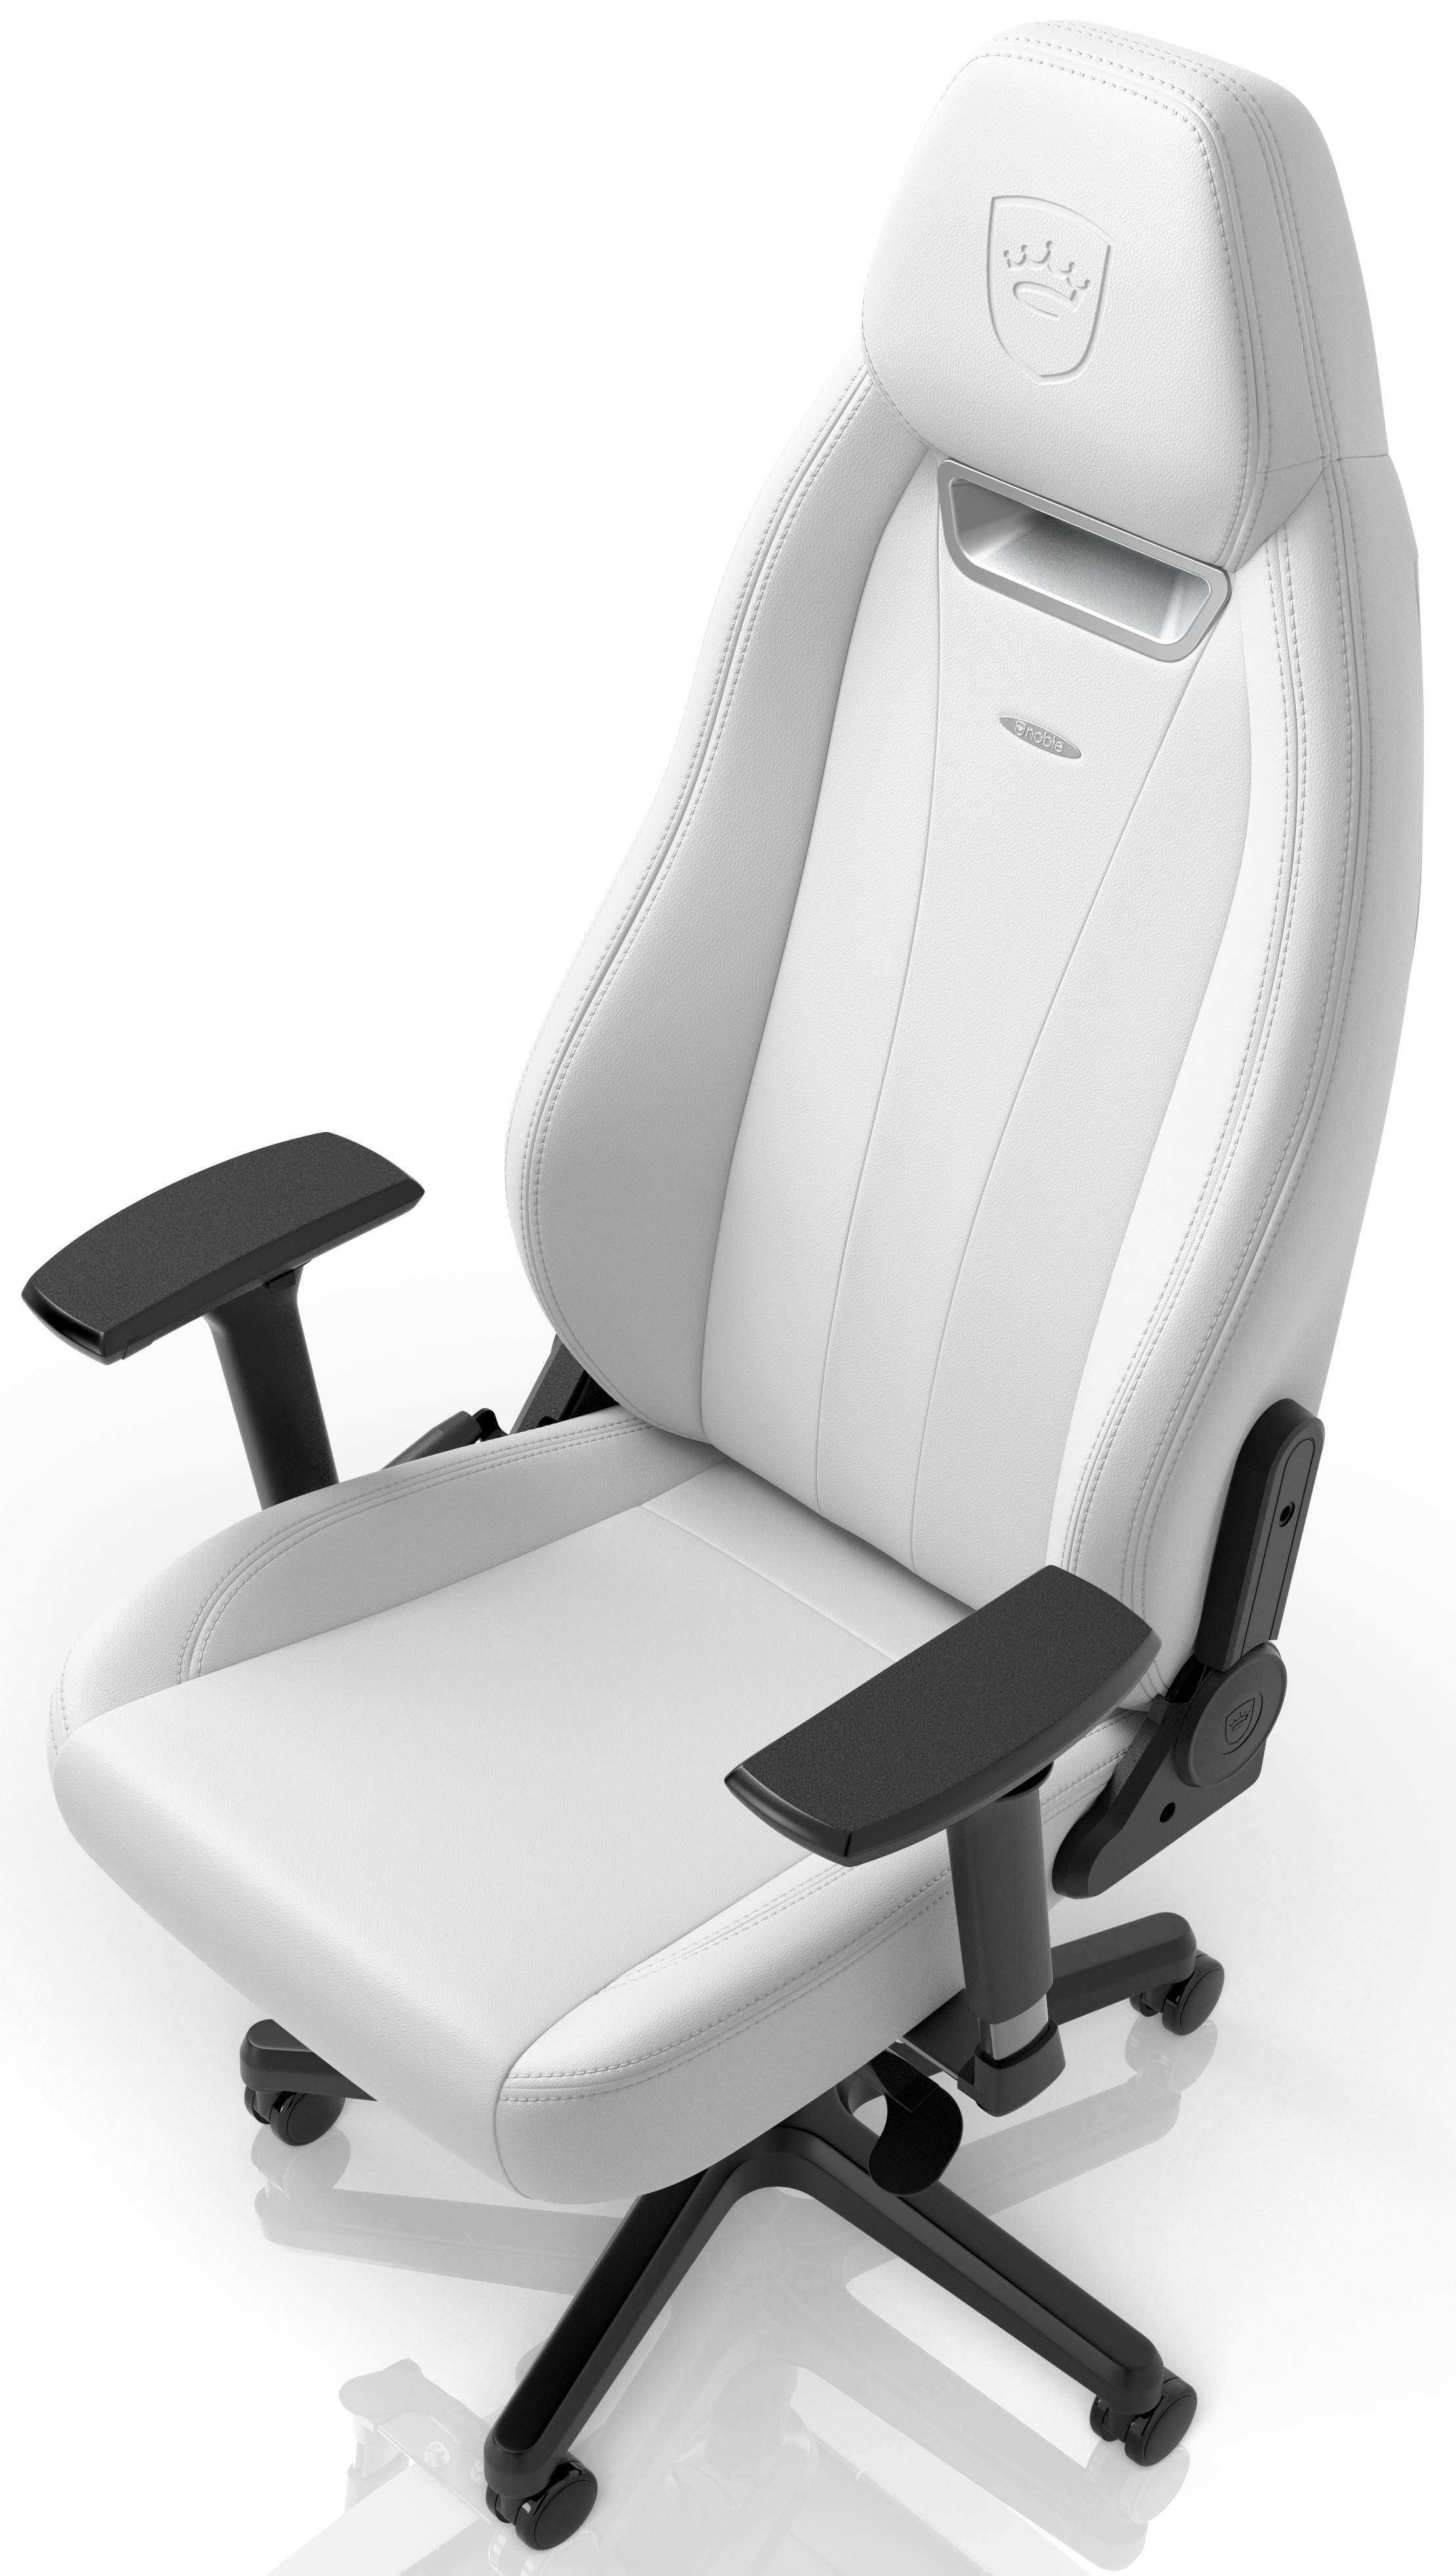 noblechairs - Cadeira noblechairs LEGEND - White Edition